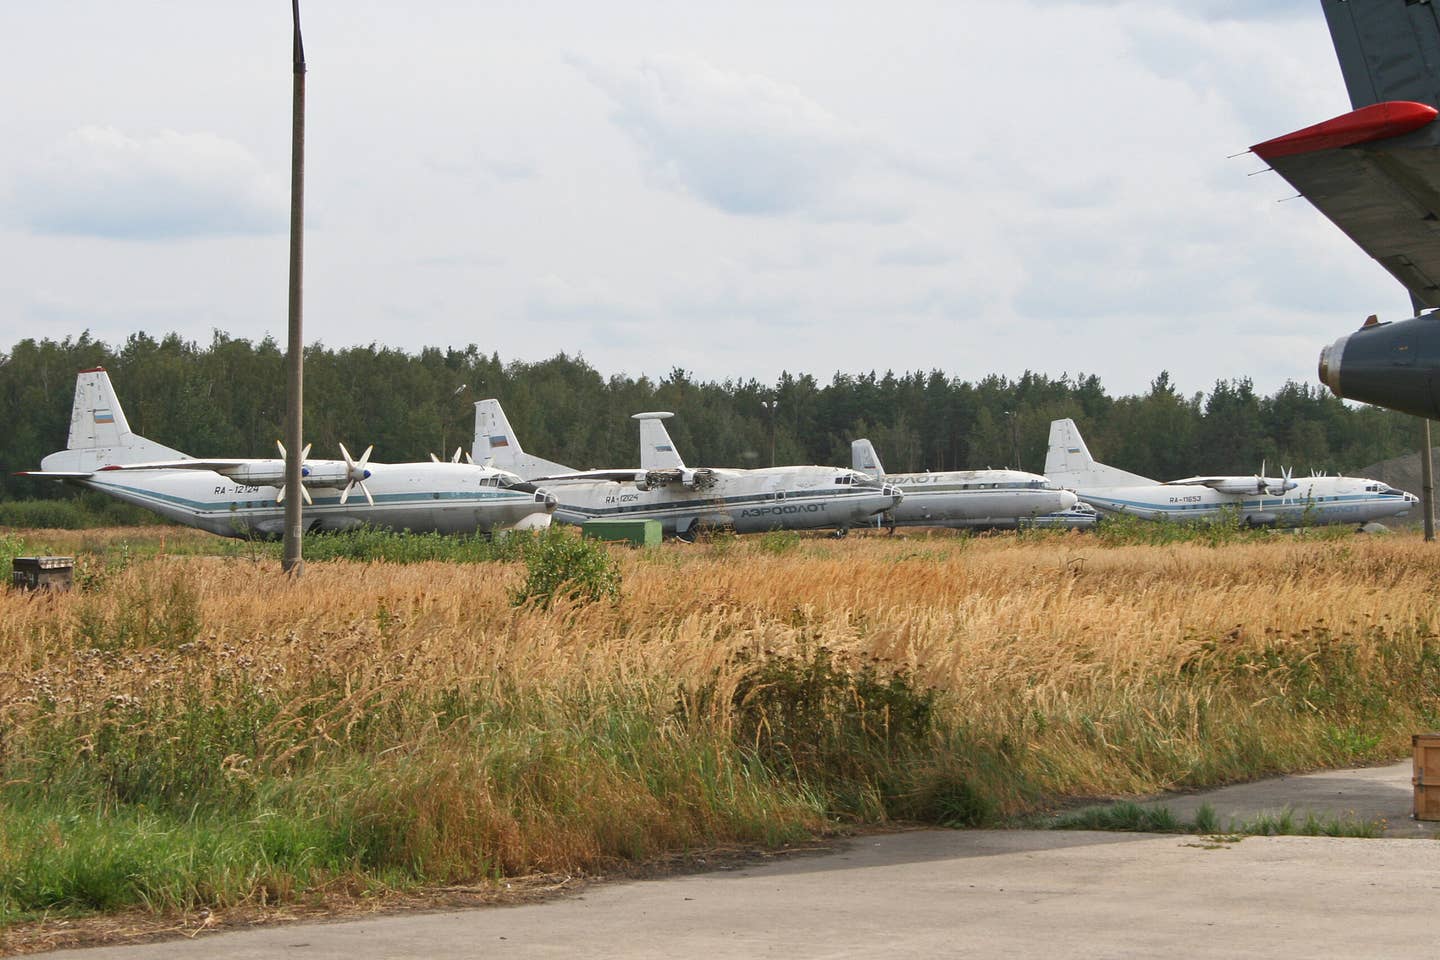 An assortment of An-12 and Il-22 transport and special mission aircraft parked on the southside ramp at the airbase of Chkalovsky, home of the 8th Aviation Division of Special Purpose, in 2013. <em>Alan Wilson/Wikimedia Commons</em>